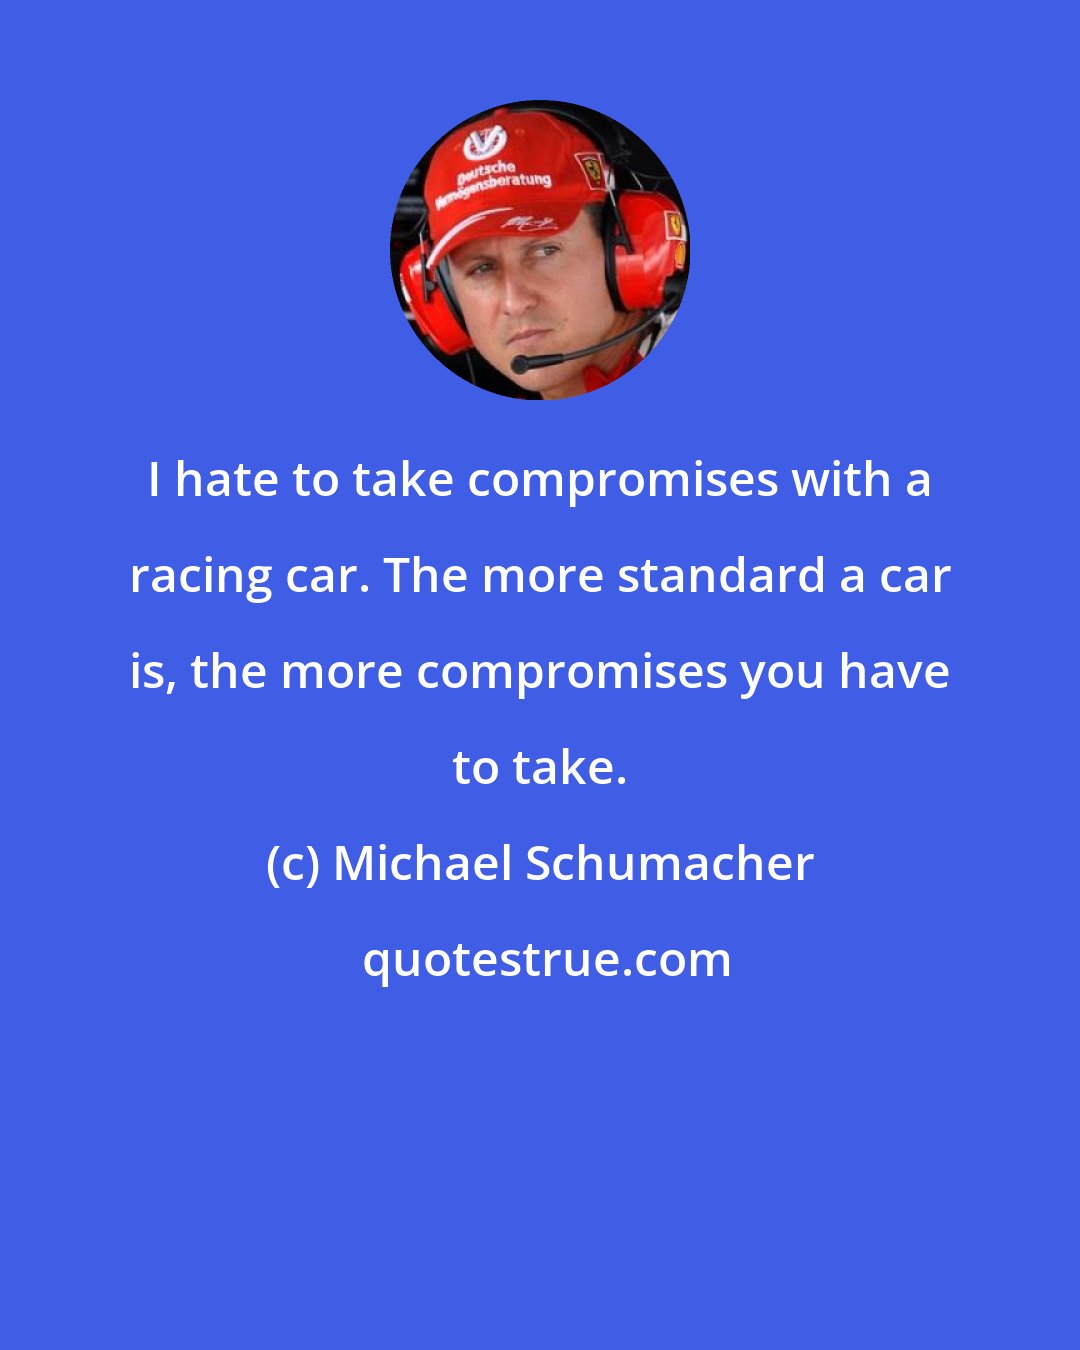 Michael Schumacher: I hate to take compromises with a racing car. The more standard a car is, the more compromises you have to take.